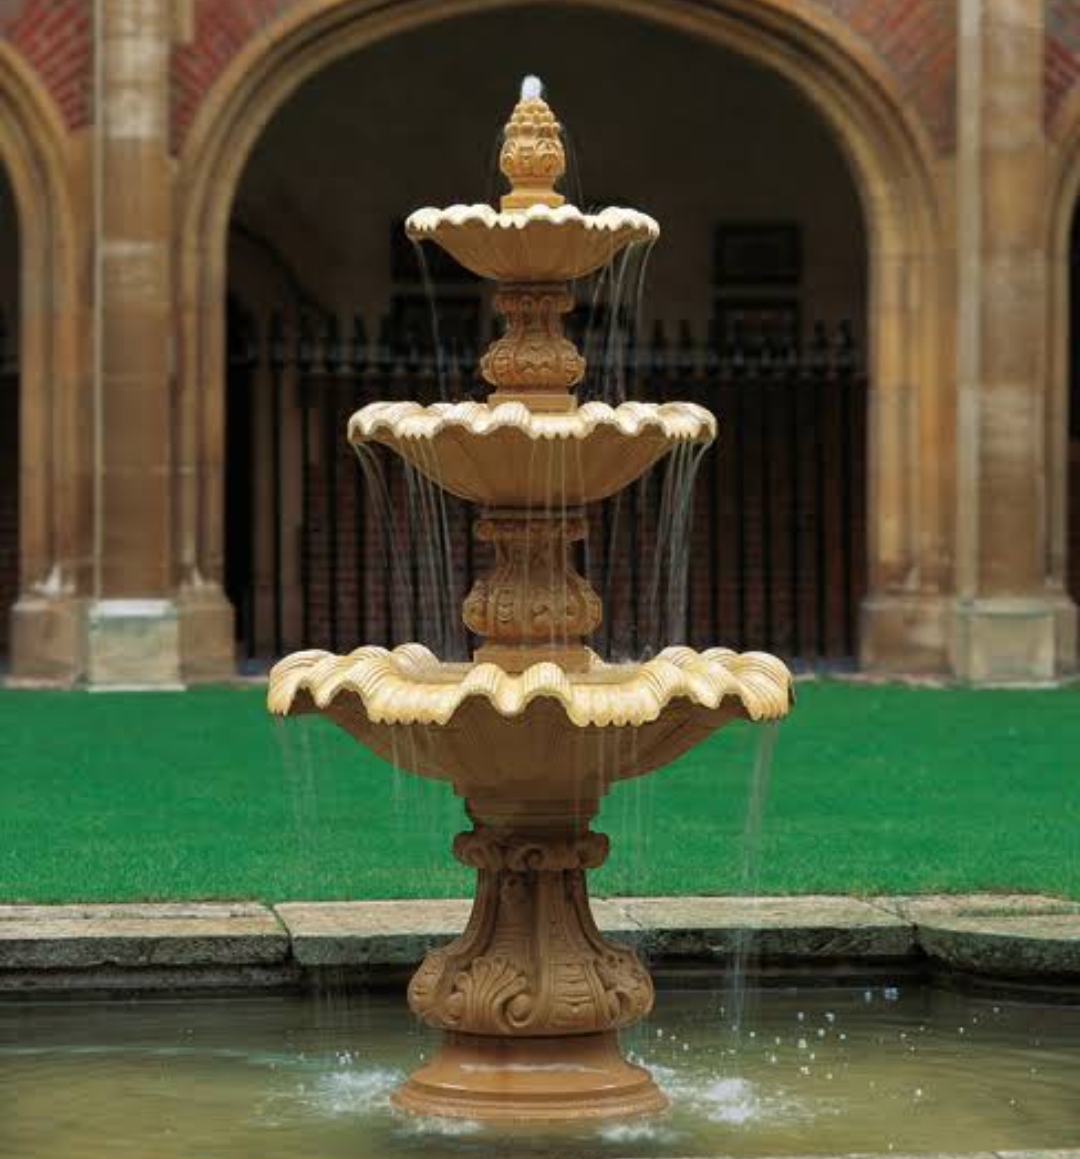 Tiered Fountains as Centerpieces